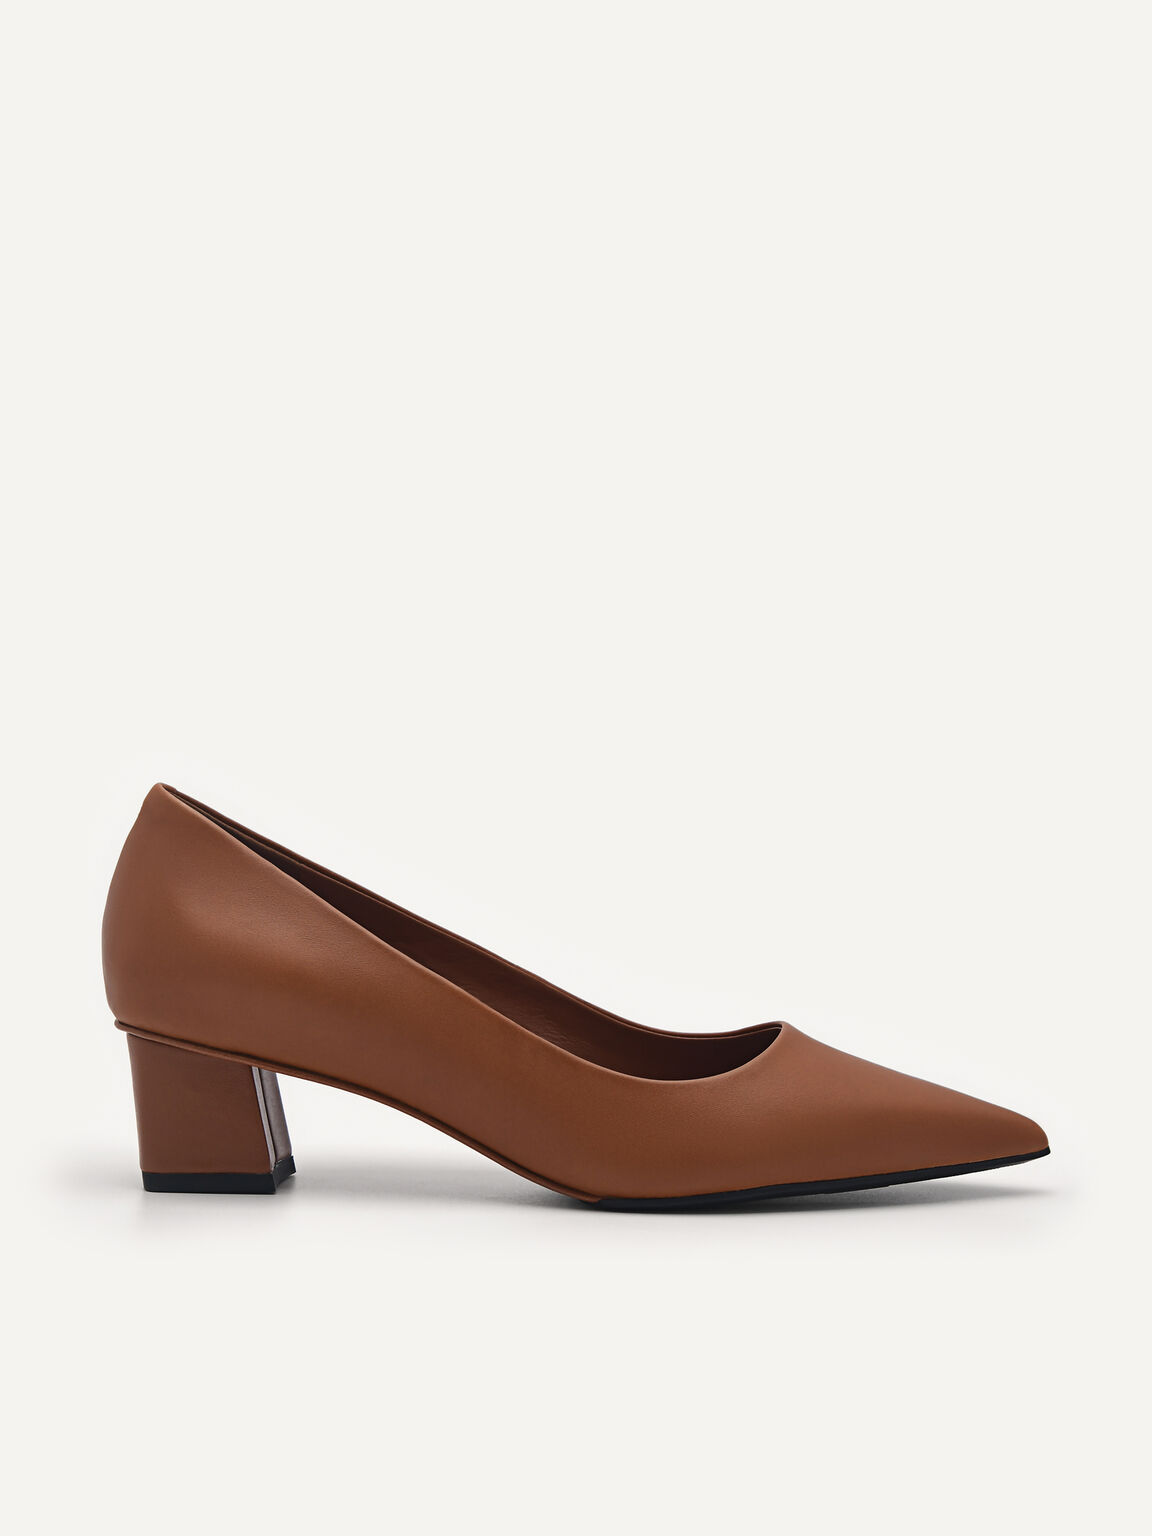 Ines Leather Pumps, Brown